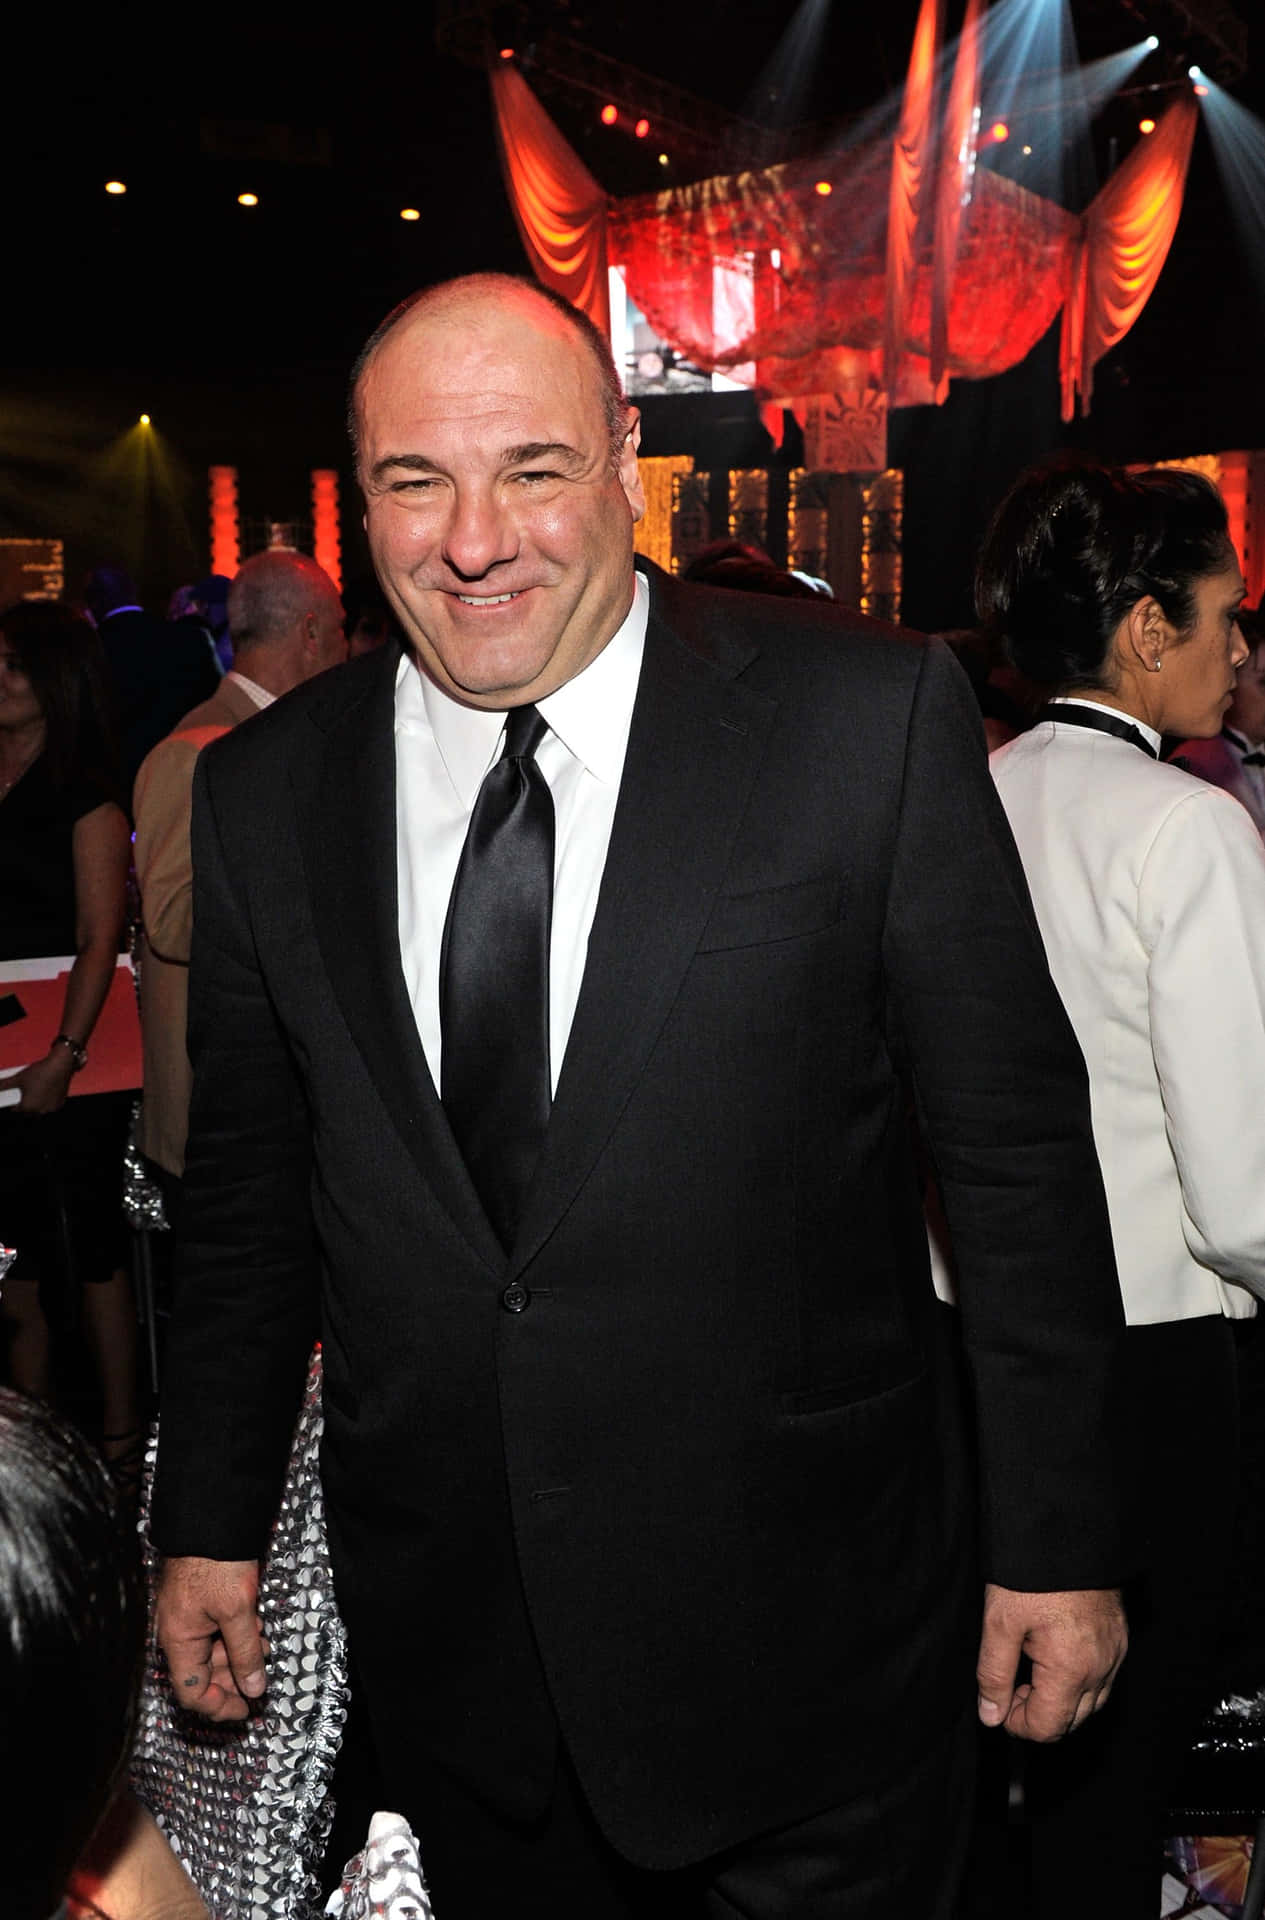 Jamesgandolfini Is An American Actor Best Known For His Role As Tony Soprano In The Television Series 